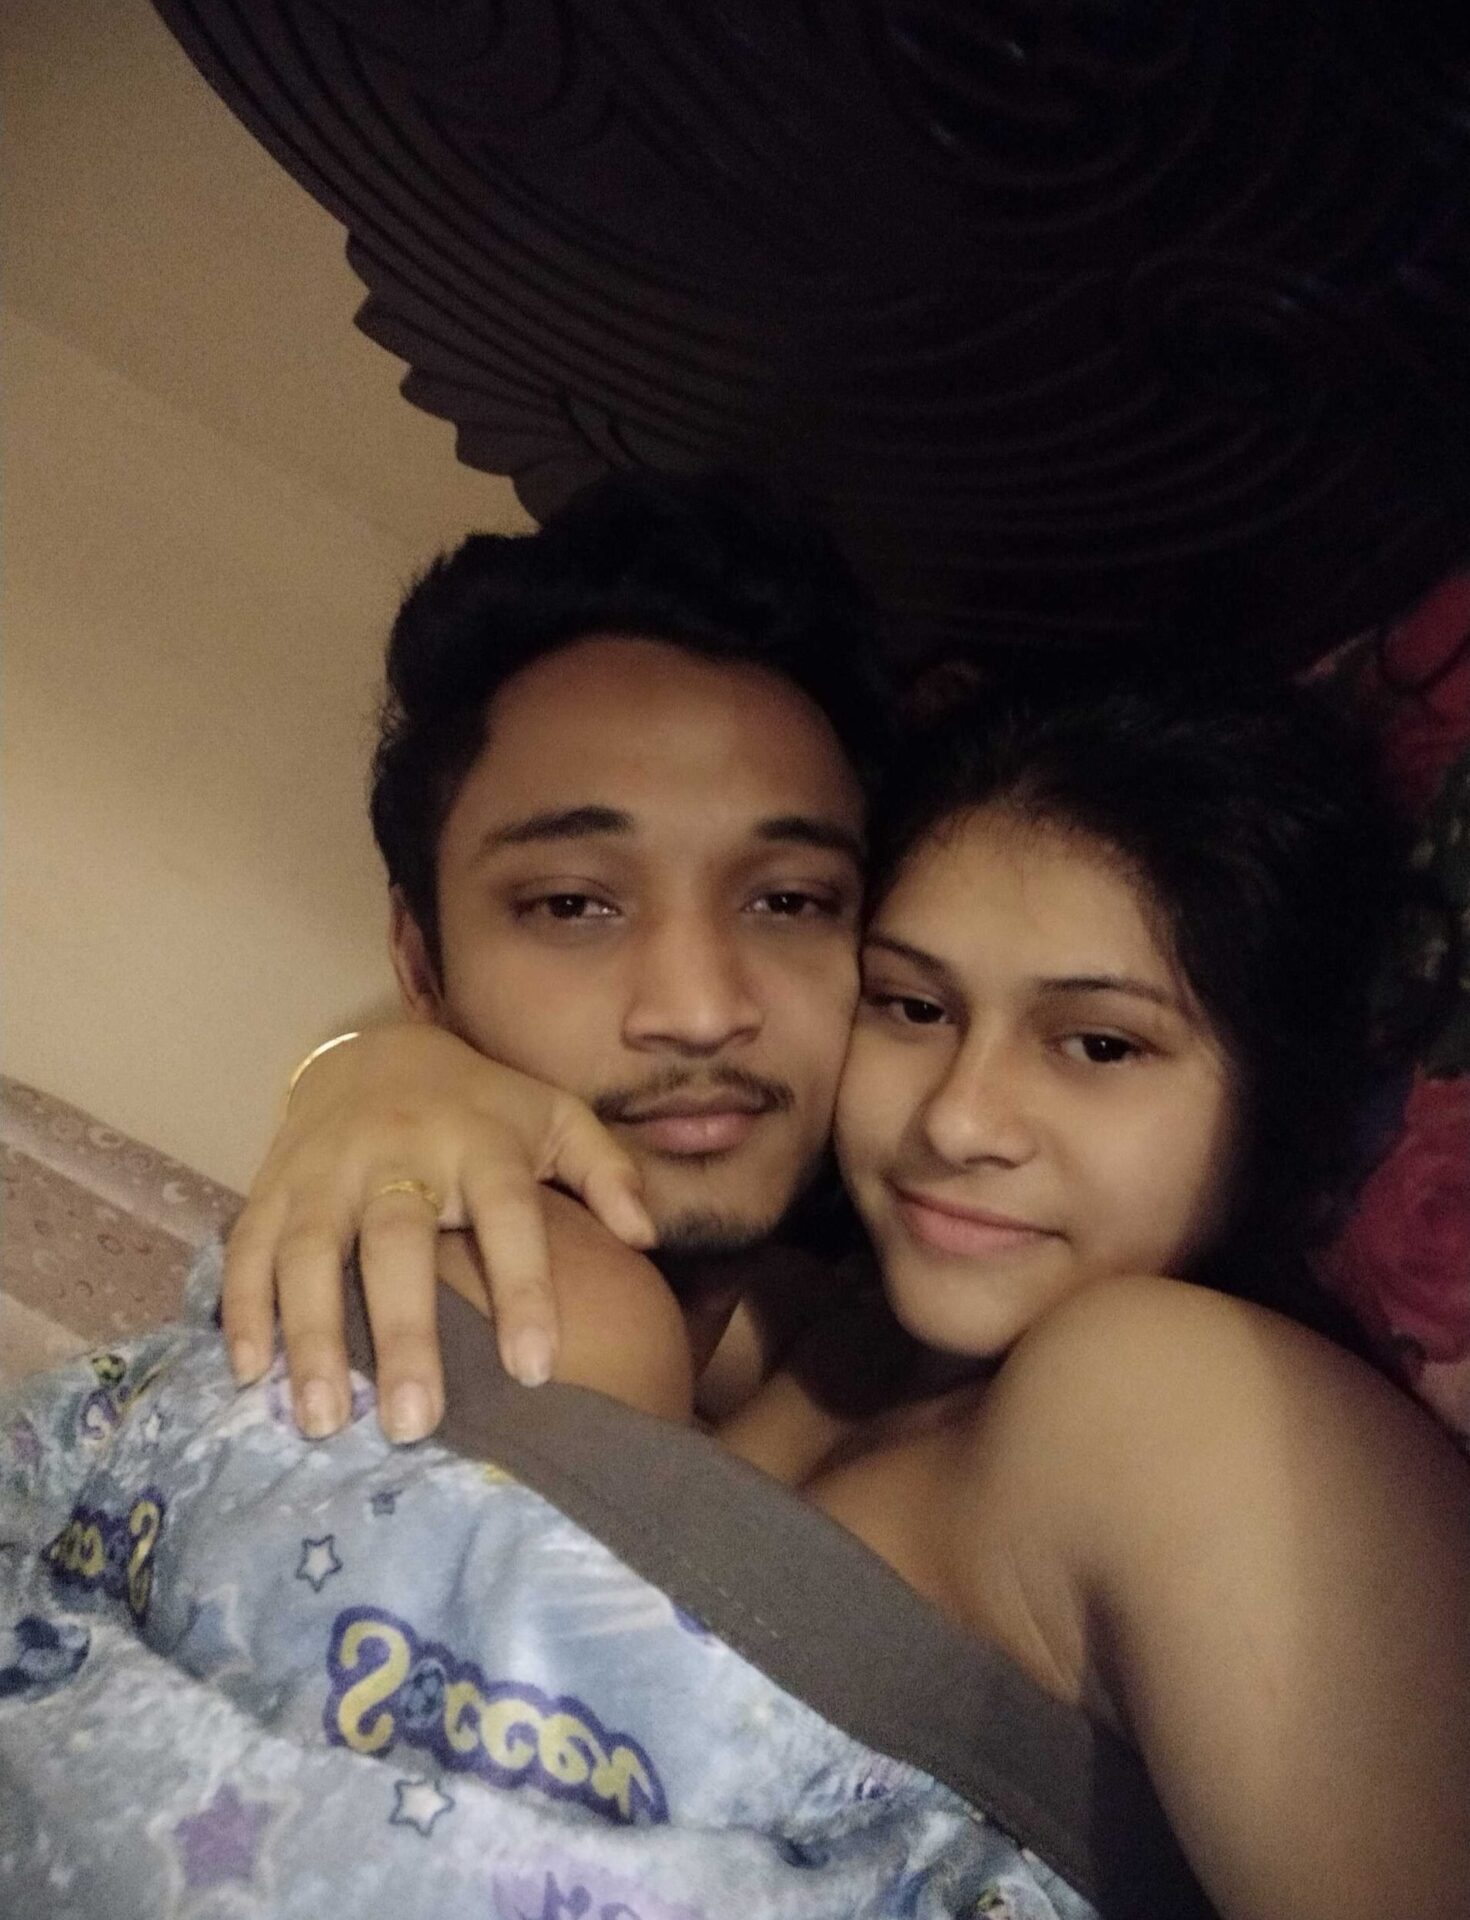 Newly married couple first night romance photos pic image